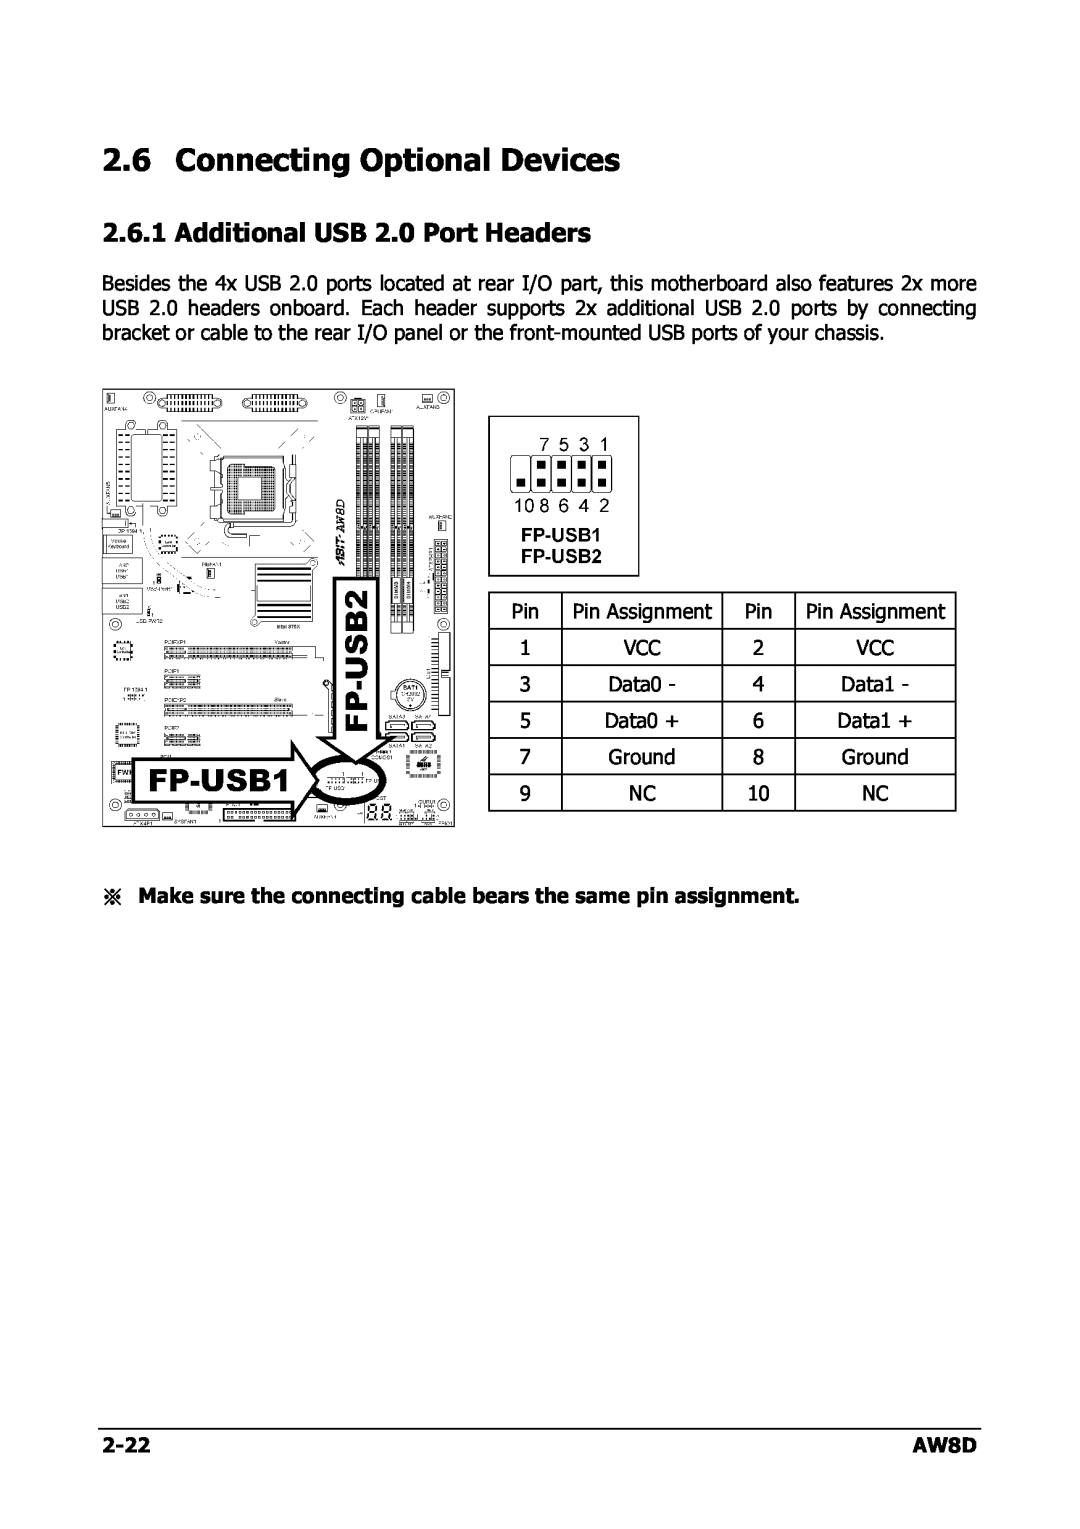 Intel AW8D user manual Connecting Optional Devices, Additional USB 2.0 Port Headers 